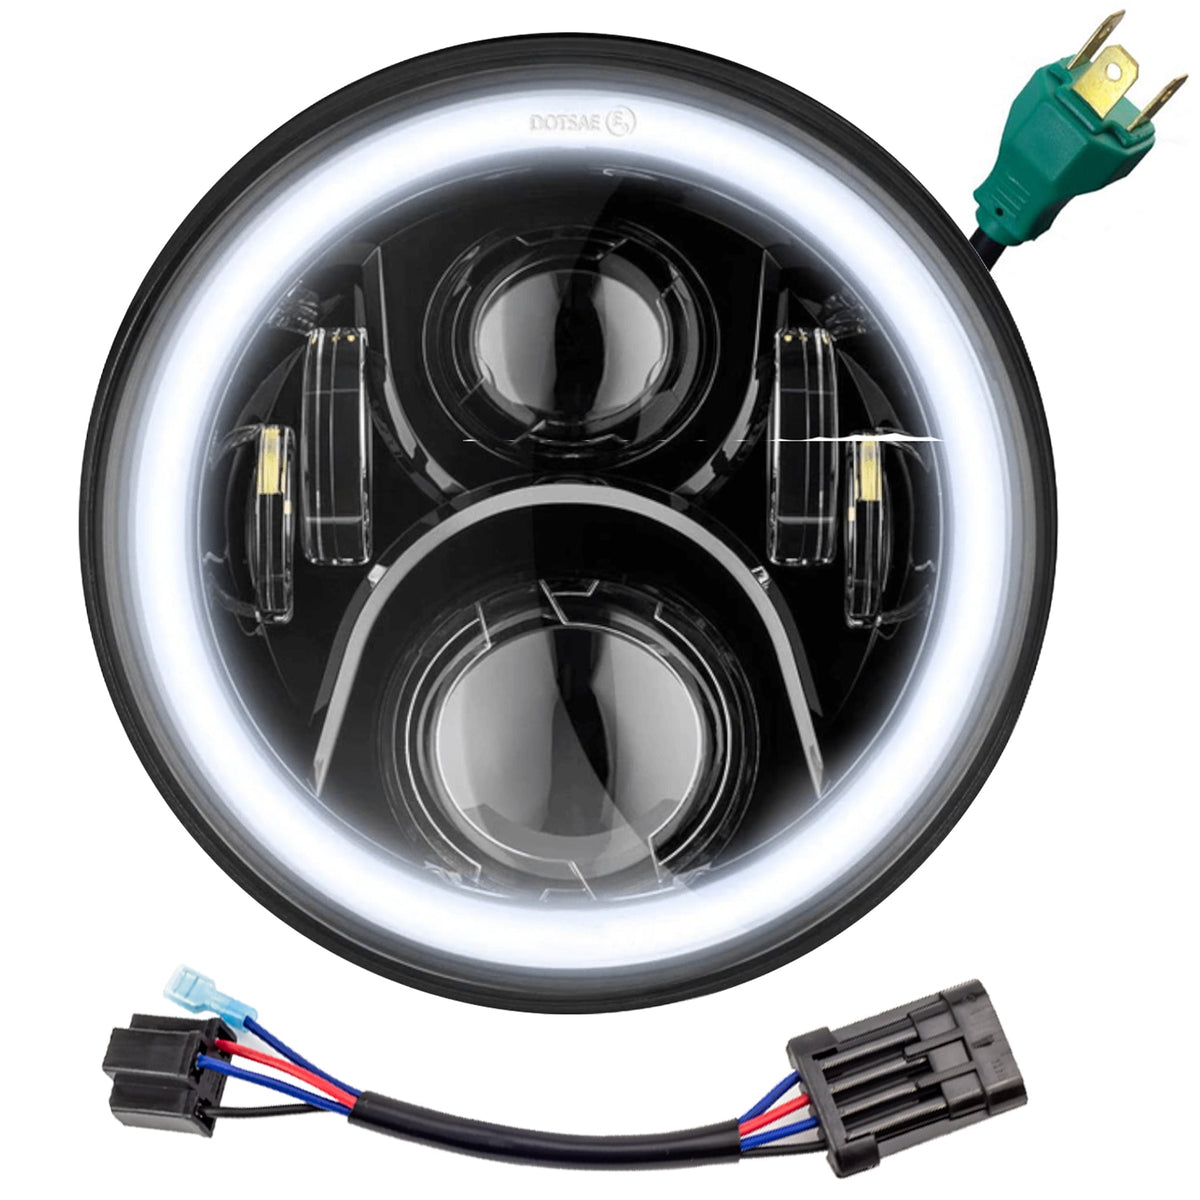 Eagle Lights 7" LED Headlight with LED Halo Ring for Harley Davidson and Indian Motorcycles - Generation II / Black Kit